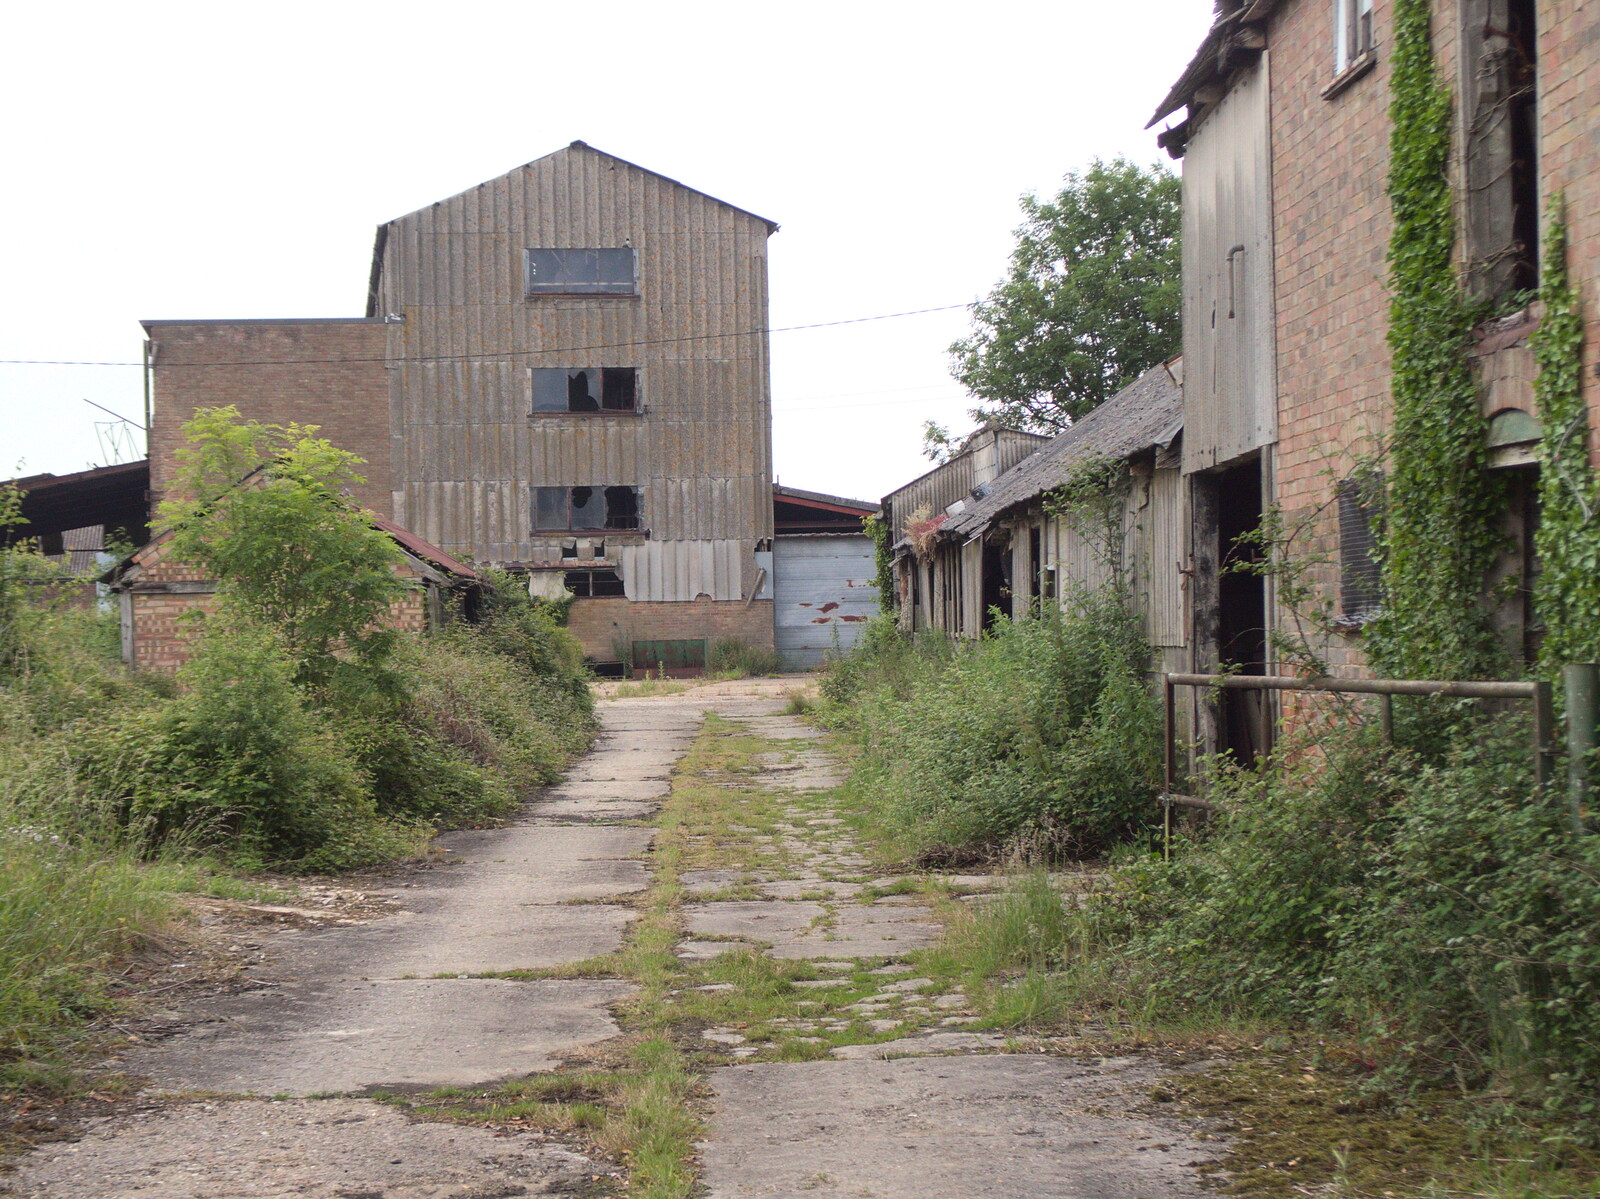 A derelict warehouse from The BSCC at Earl Soham and at Colin and Jill's, Eye, Suffolk - 26th June 2021